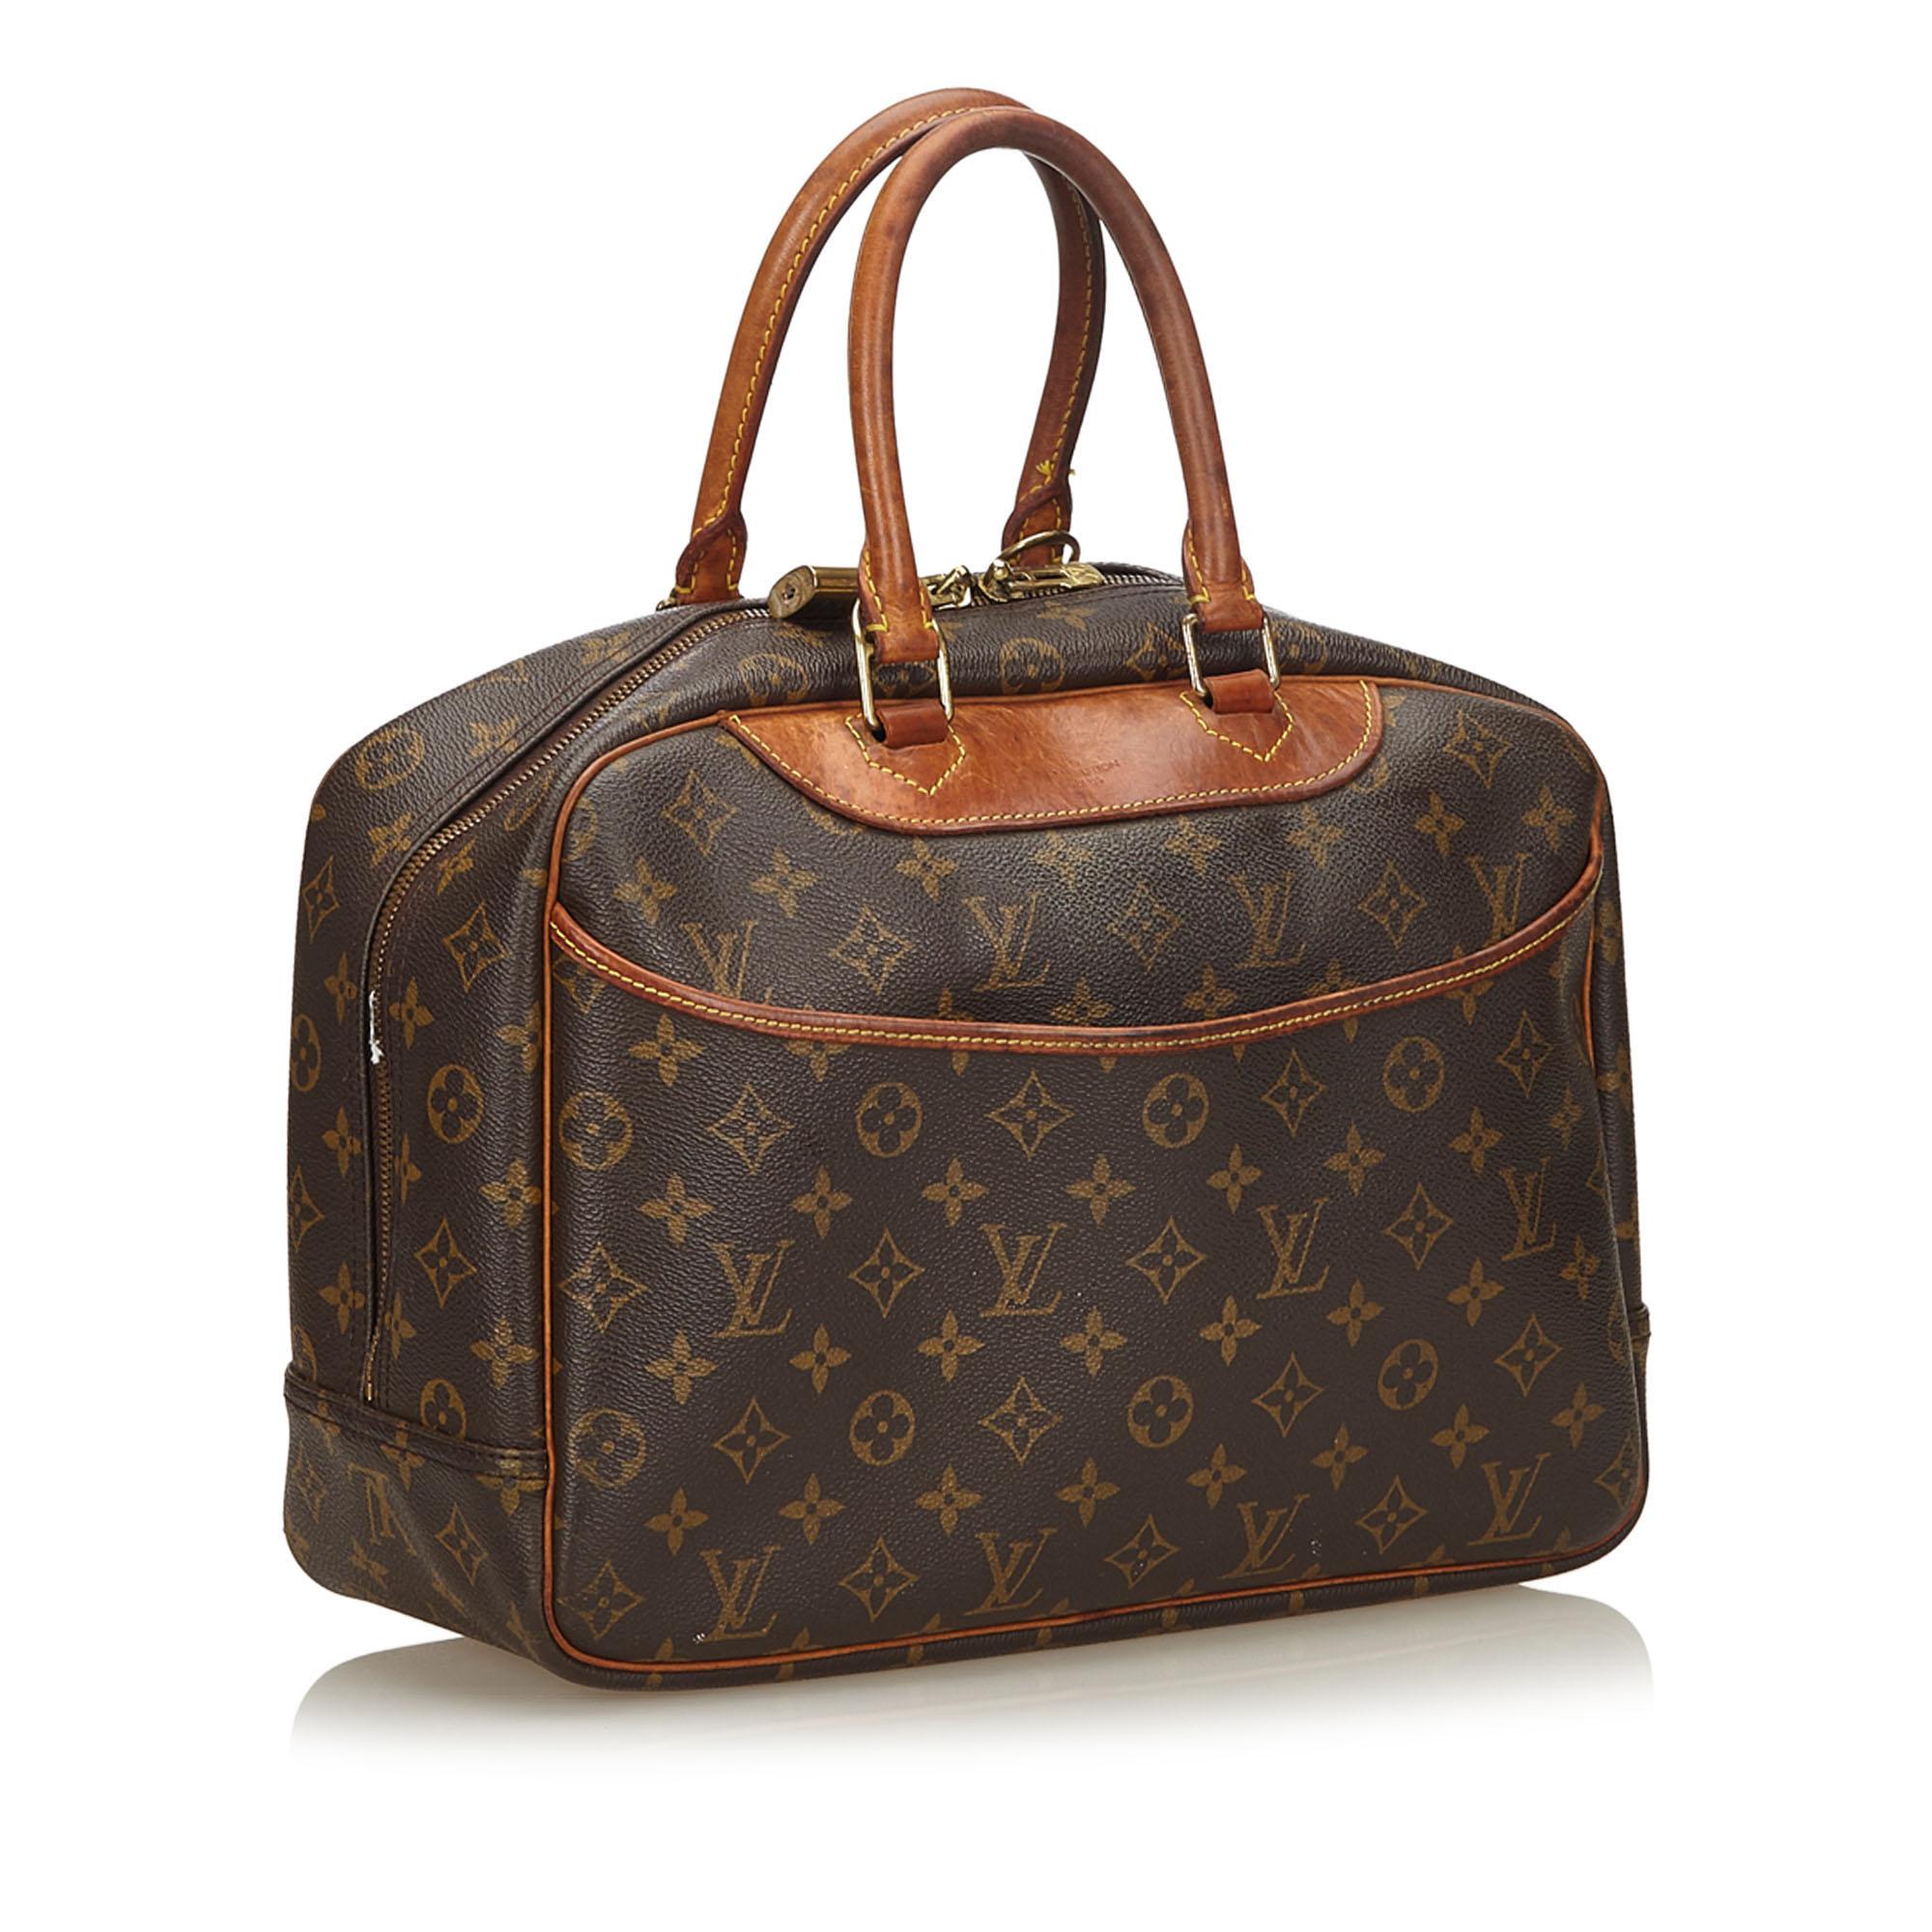 The Deauville features a monogram canvas body, rolled leather handles, an exterior slip pocket, a top zip closure, and interior open pockets. It carries as B condition rating.

Inclusions: 
Padlock


Louis Vuitton pieces do not come with an